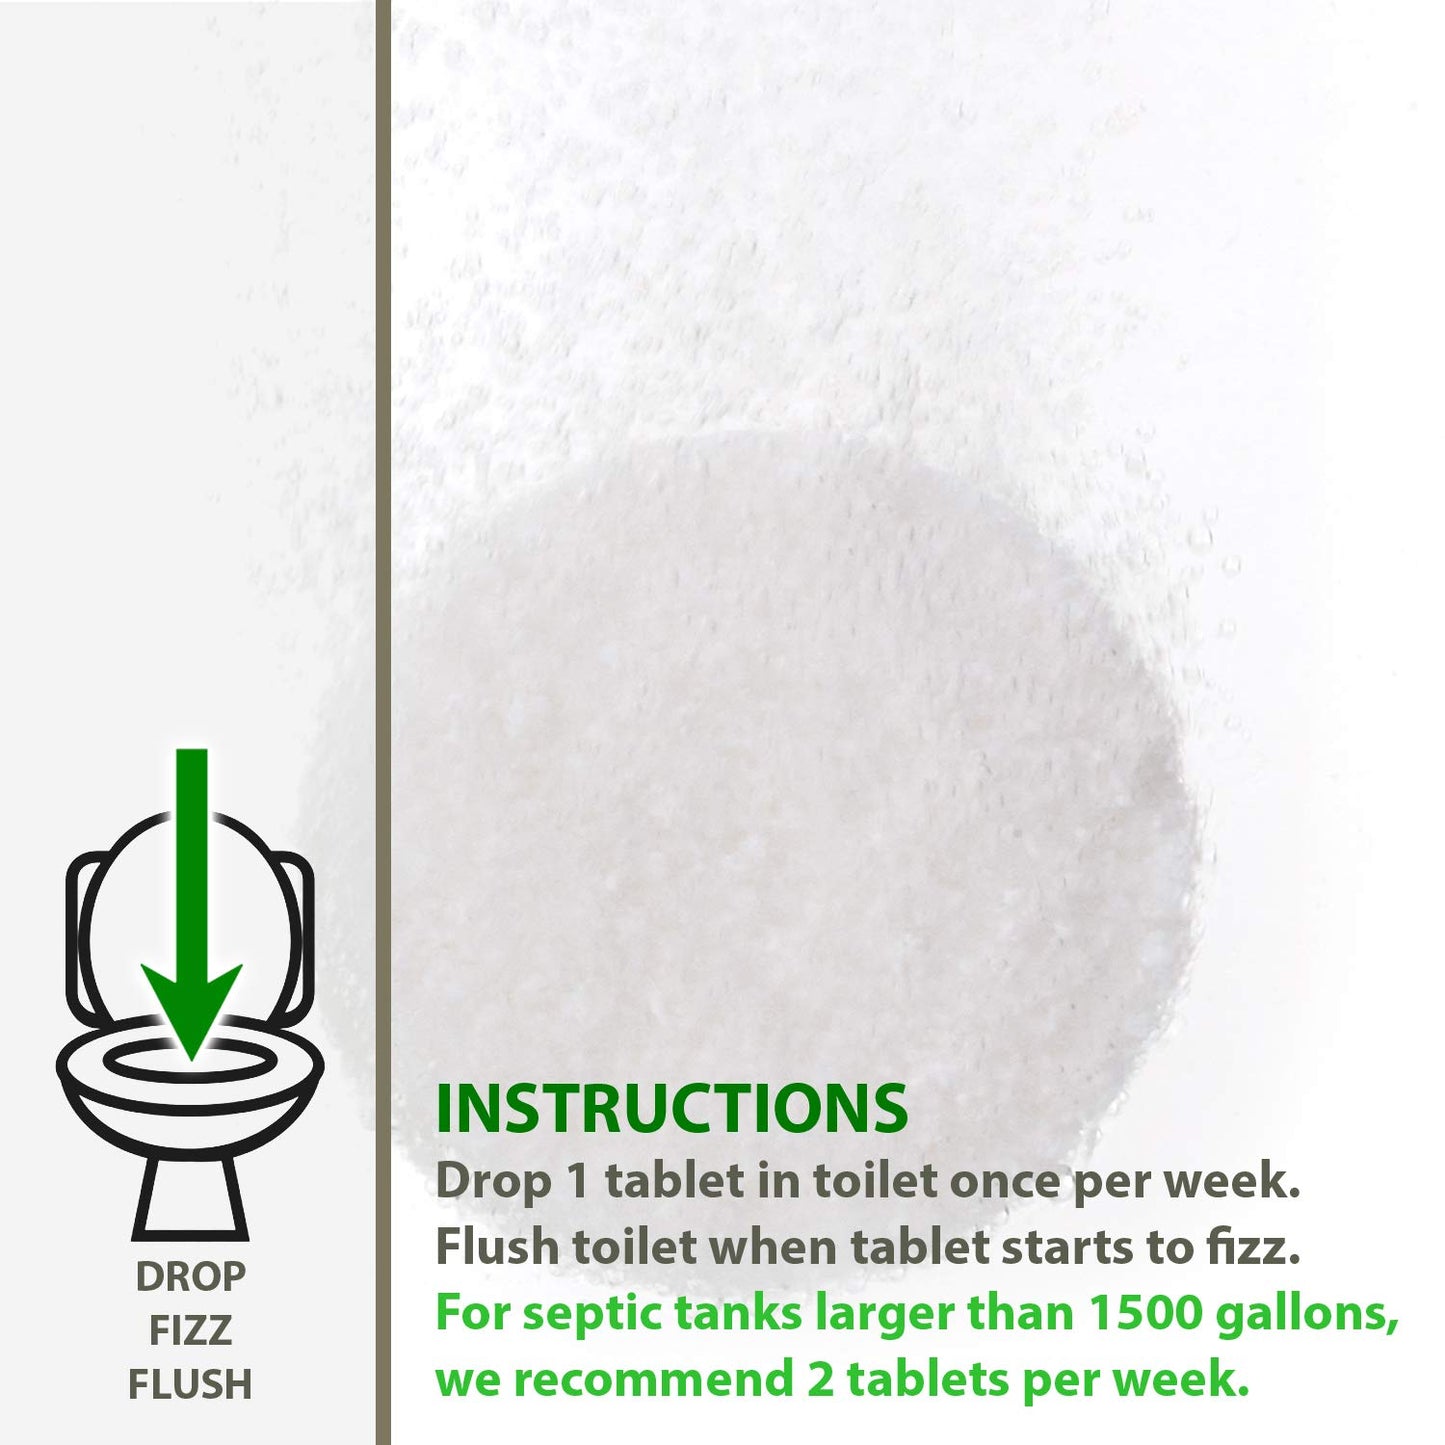 52 Weekly Septic Tank Treatment Fizz Tablets – Easy Flush Bio Toilet Tabs with Billions of Active Bacteria per Tablet – 1 Year Supply - 100% Natural & Safe for All Plumbing & Drain Lines…